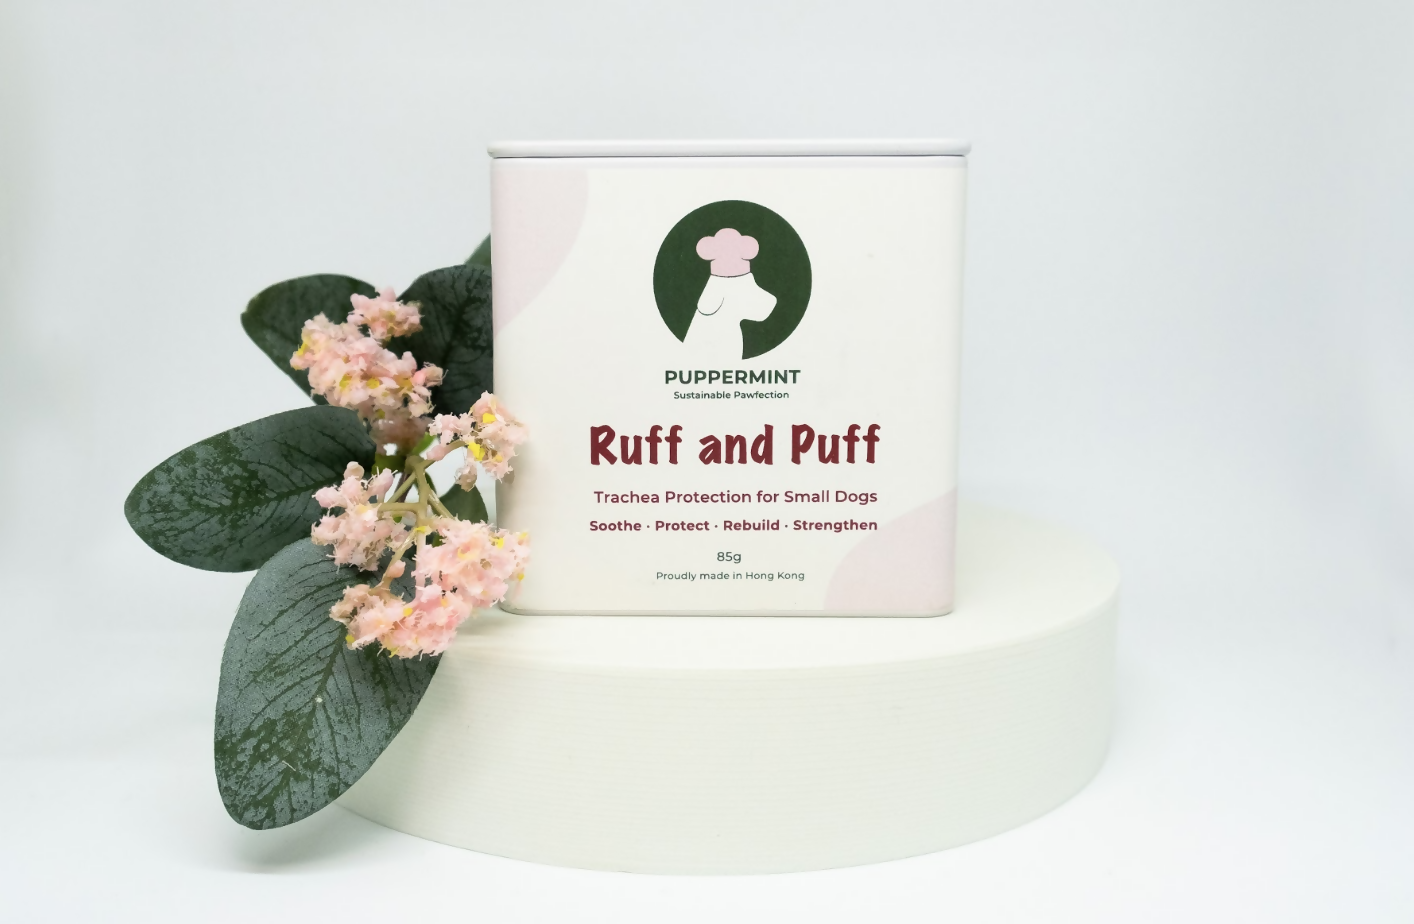 Puppermint - Ruff and Puff - Trachea Protection for Small Dogs